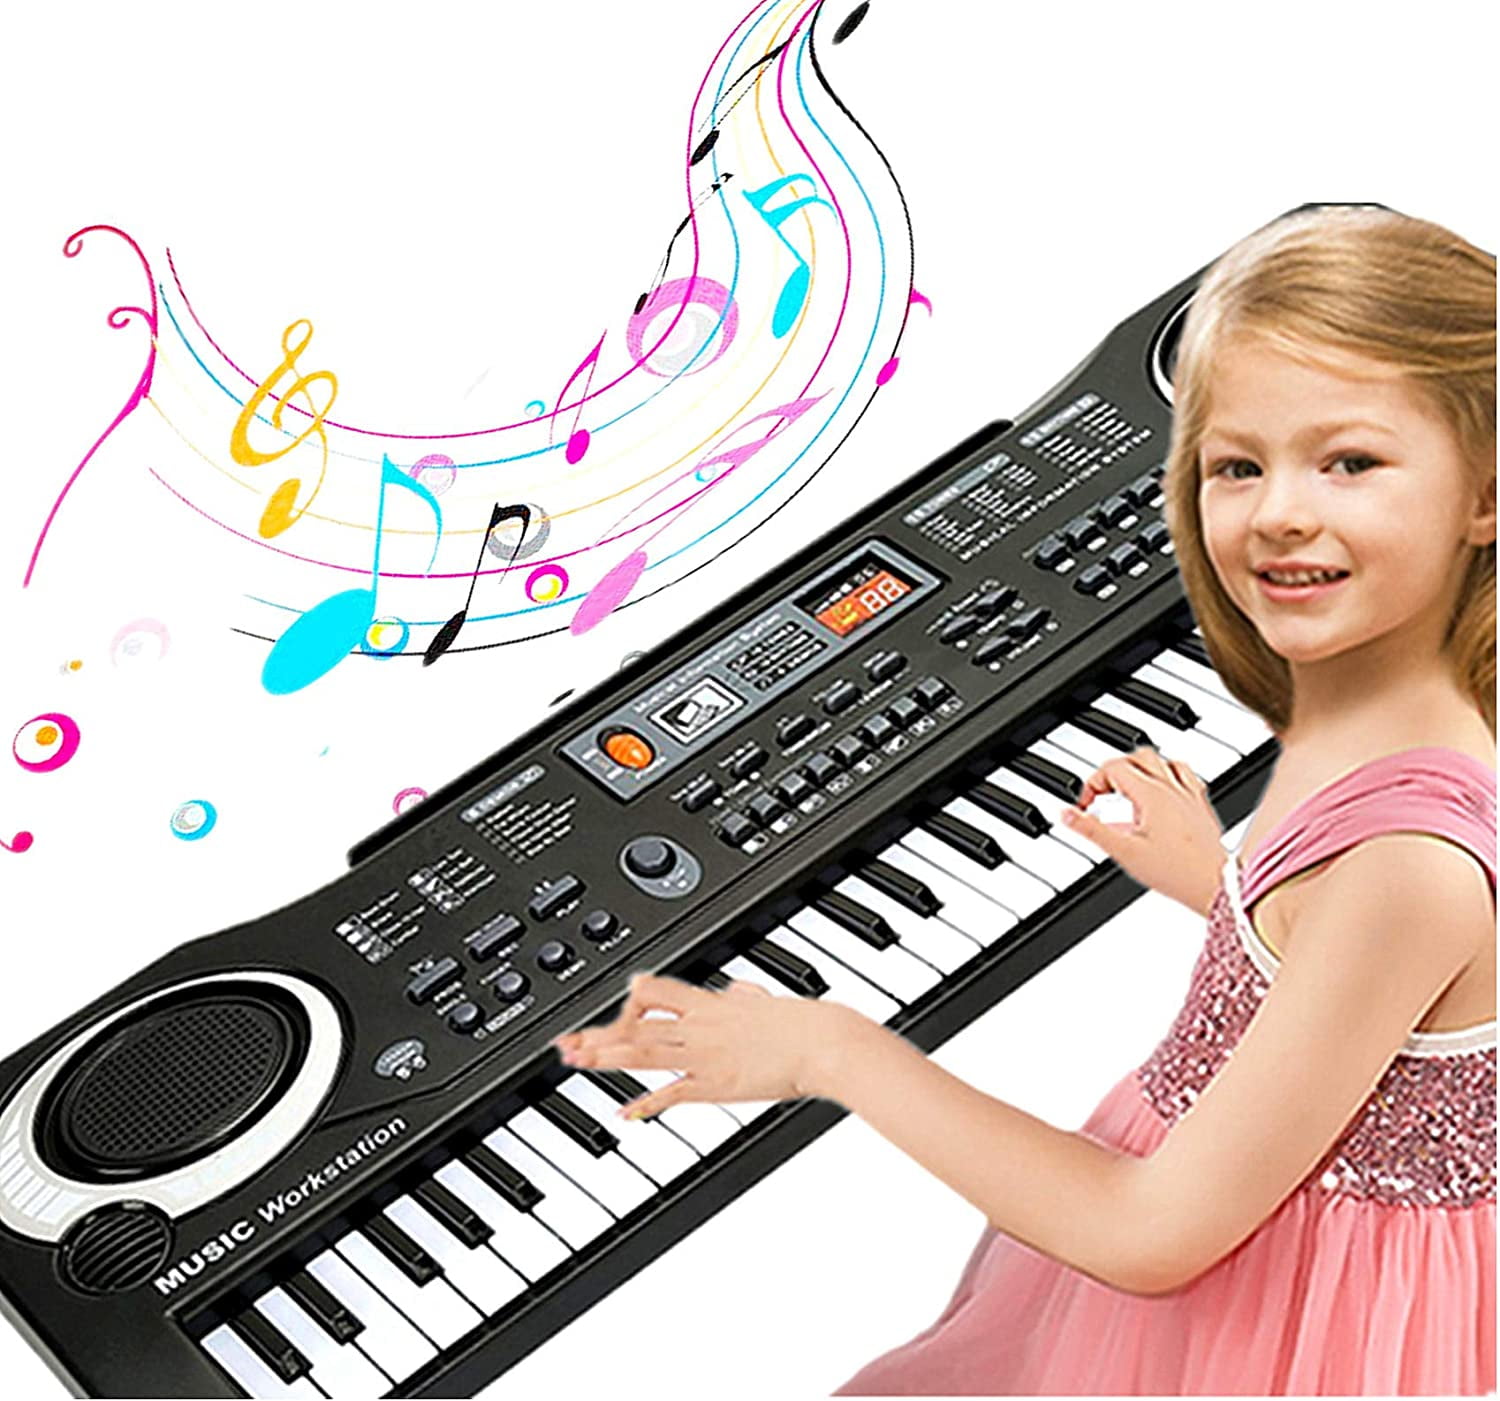 SEMART Keyboard Piano For Kids Portable Electric Digital Piano keyboards Musical instruments Toy multi-function w/Microphone Birthday Christmas Gift for kids children 